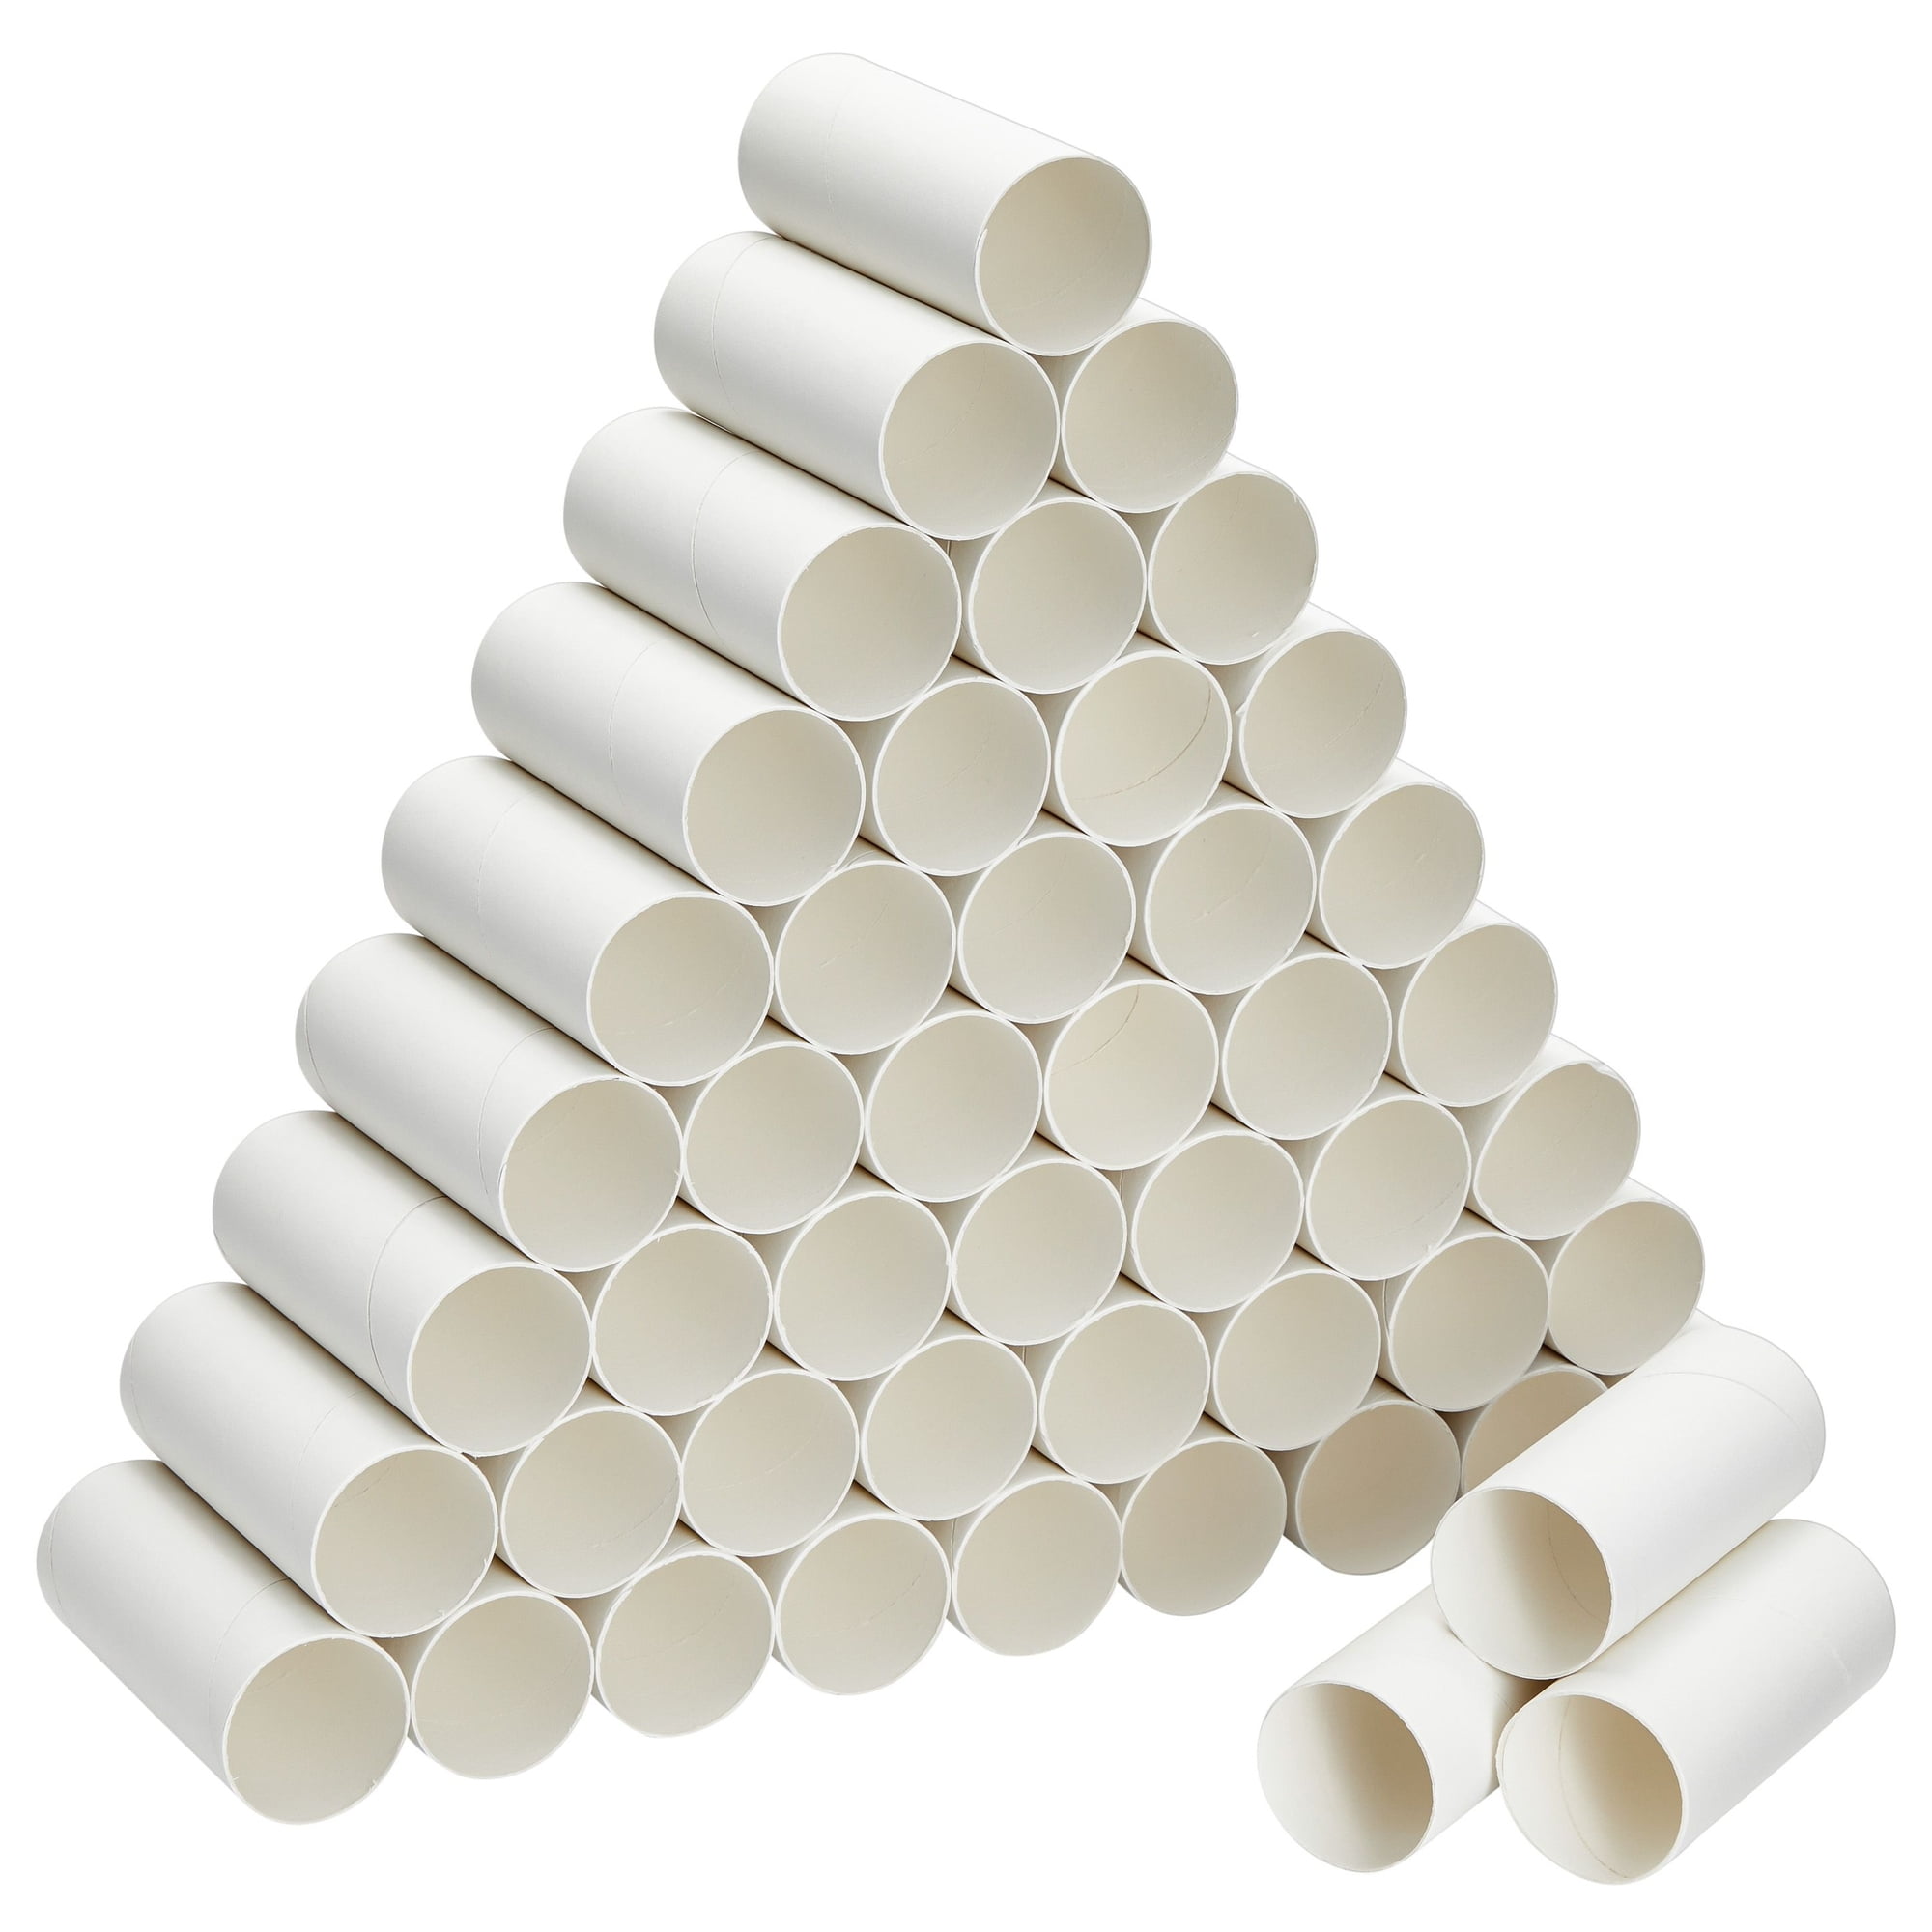 A selection of cardboard toilet paper tubes in various arrangements  isolated on a white background Stock Photo